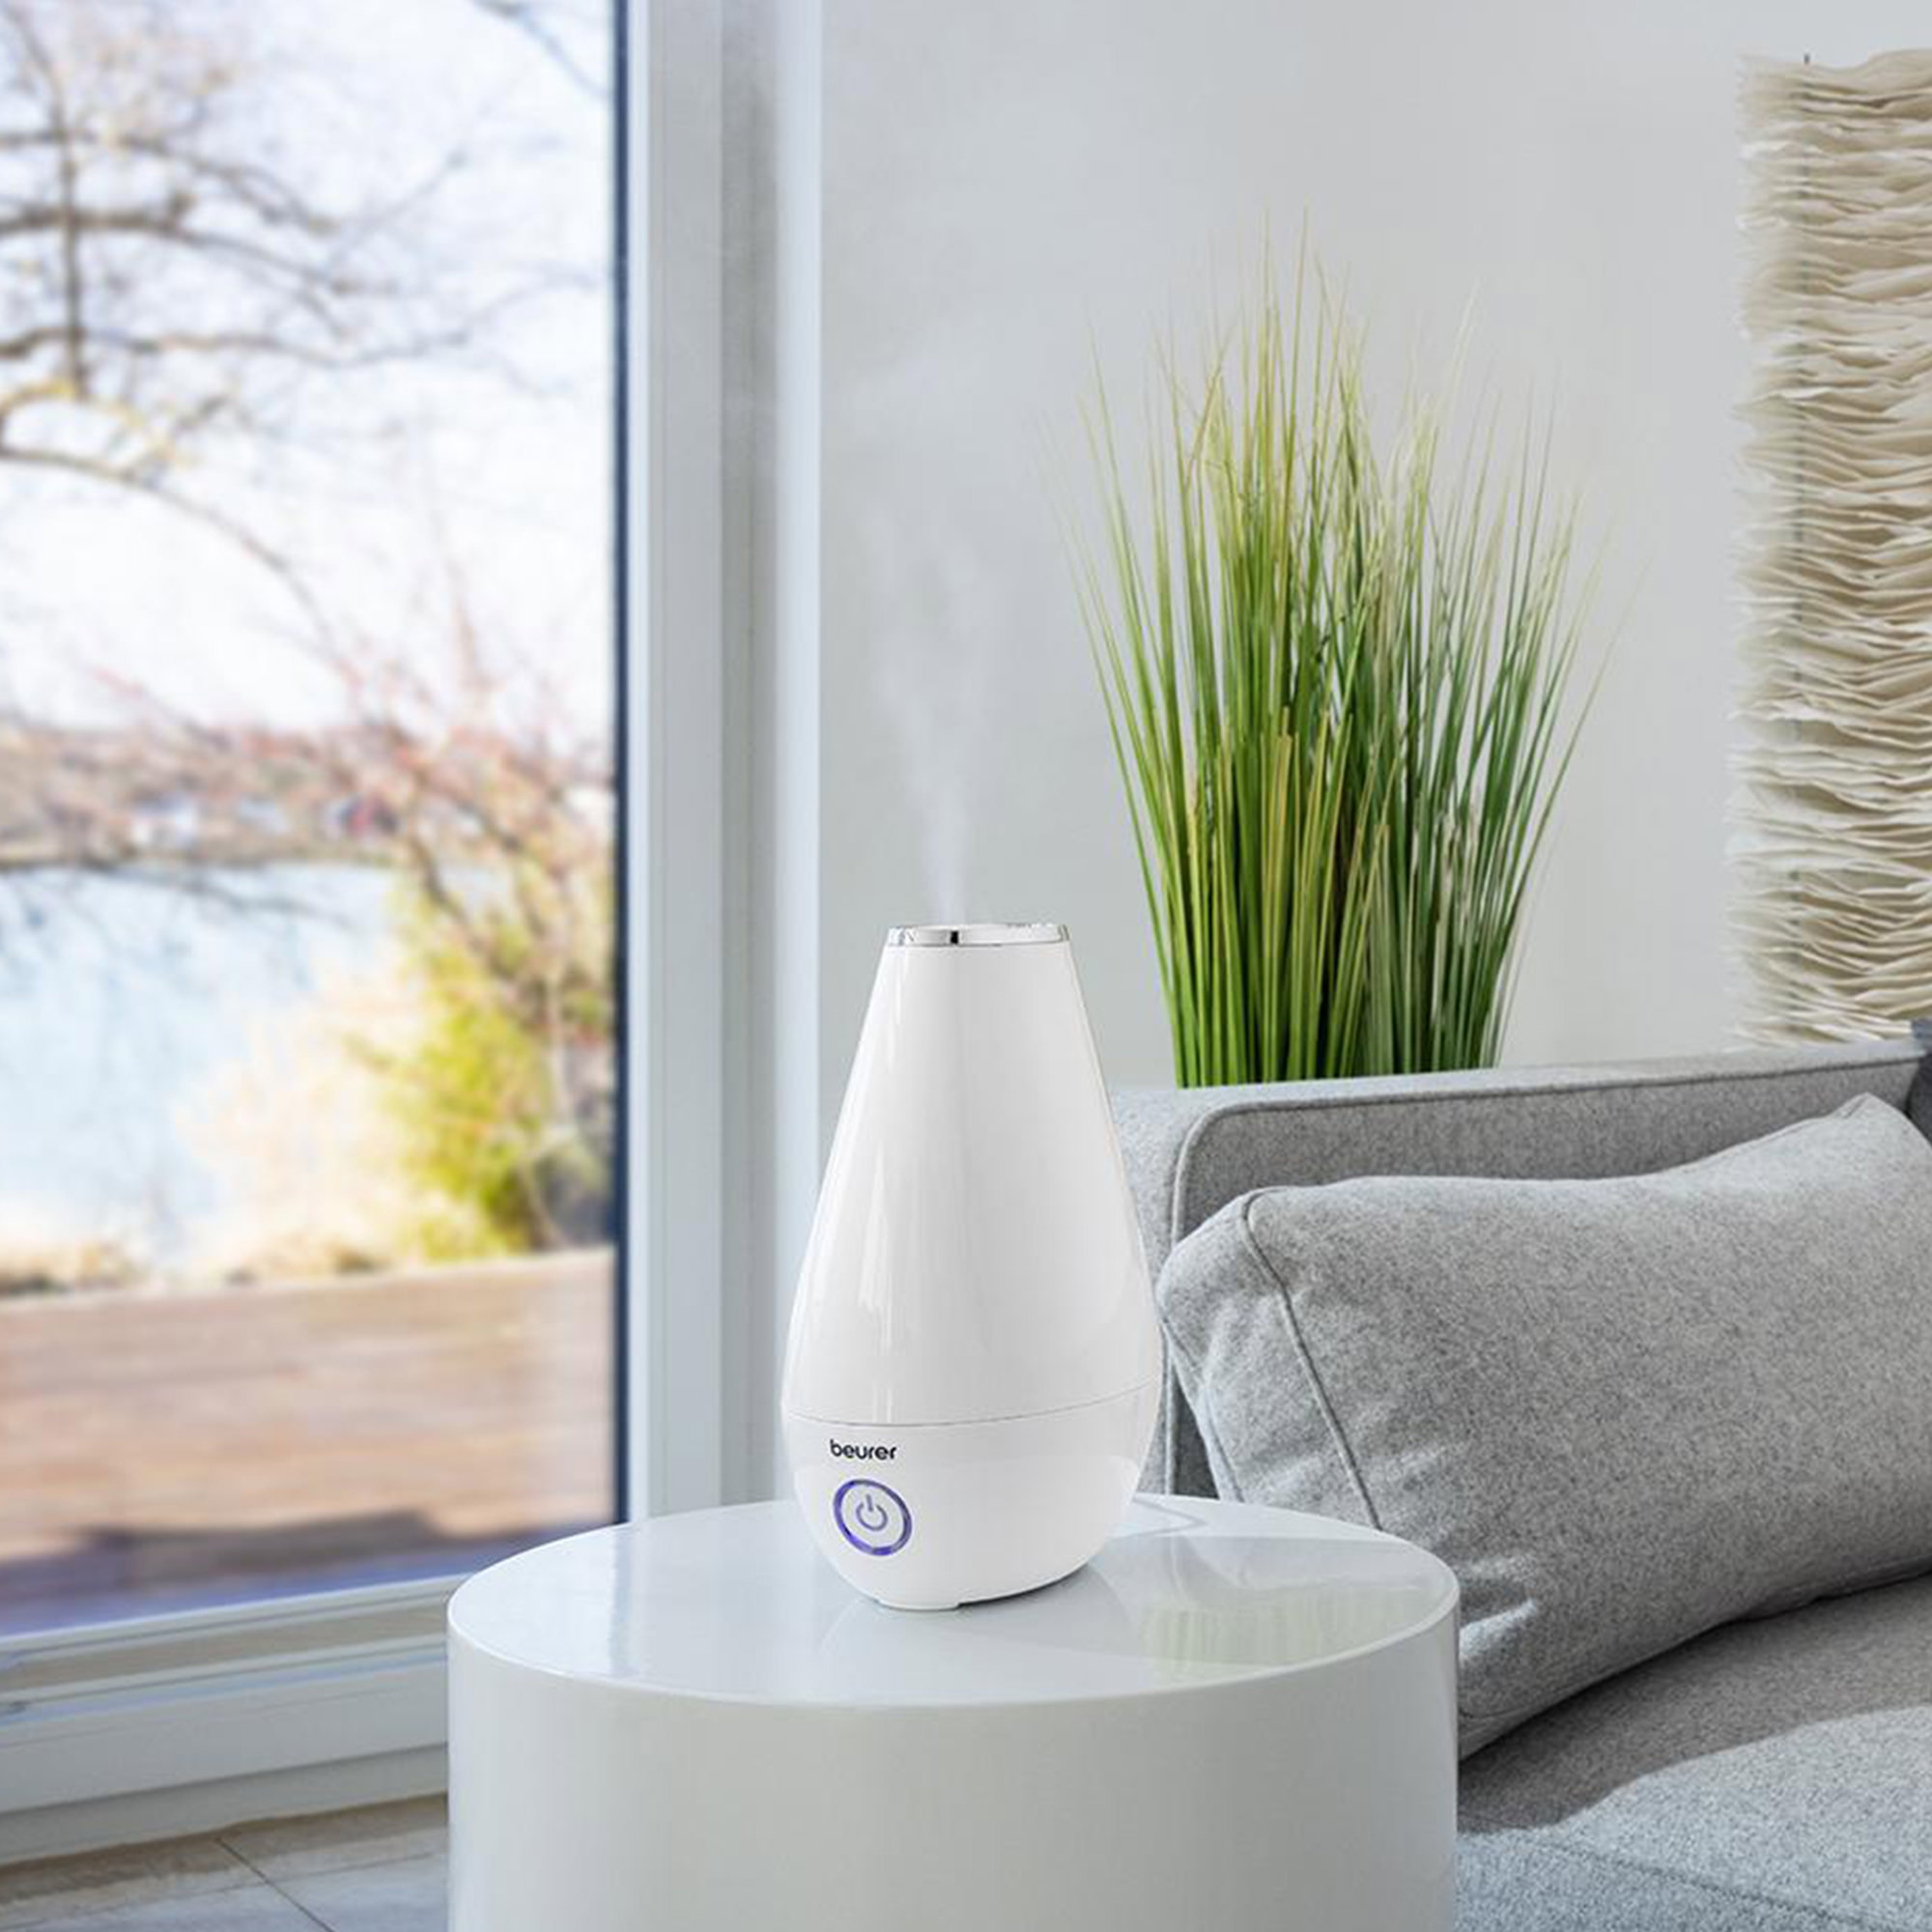 Beurer LB37 Aroma Diffuser and Air Humidifier CADR 20m2/h Image 2